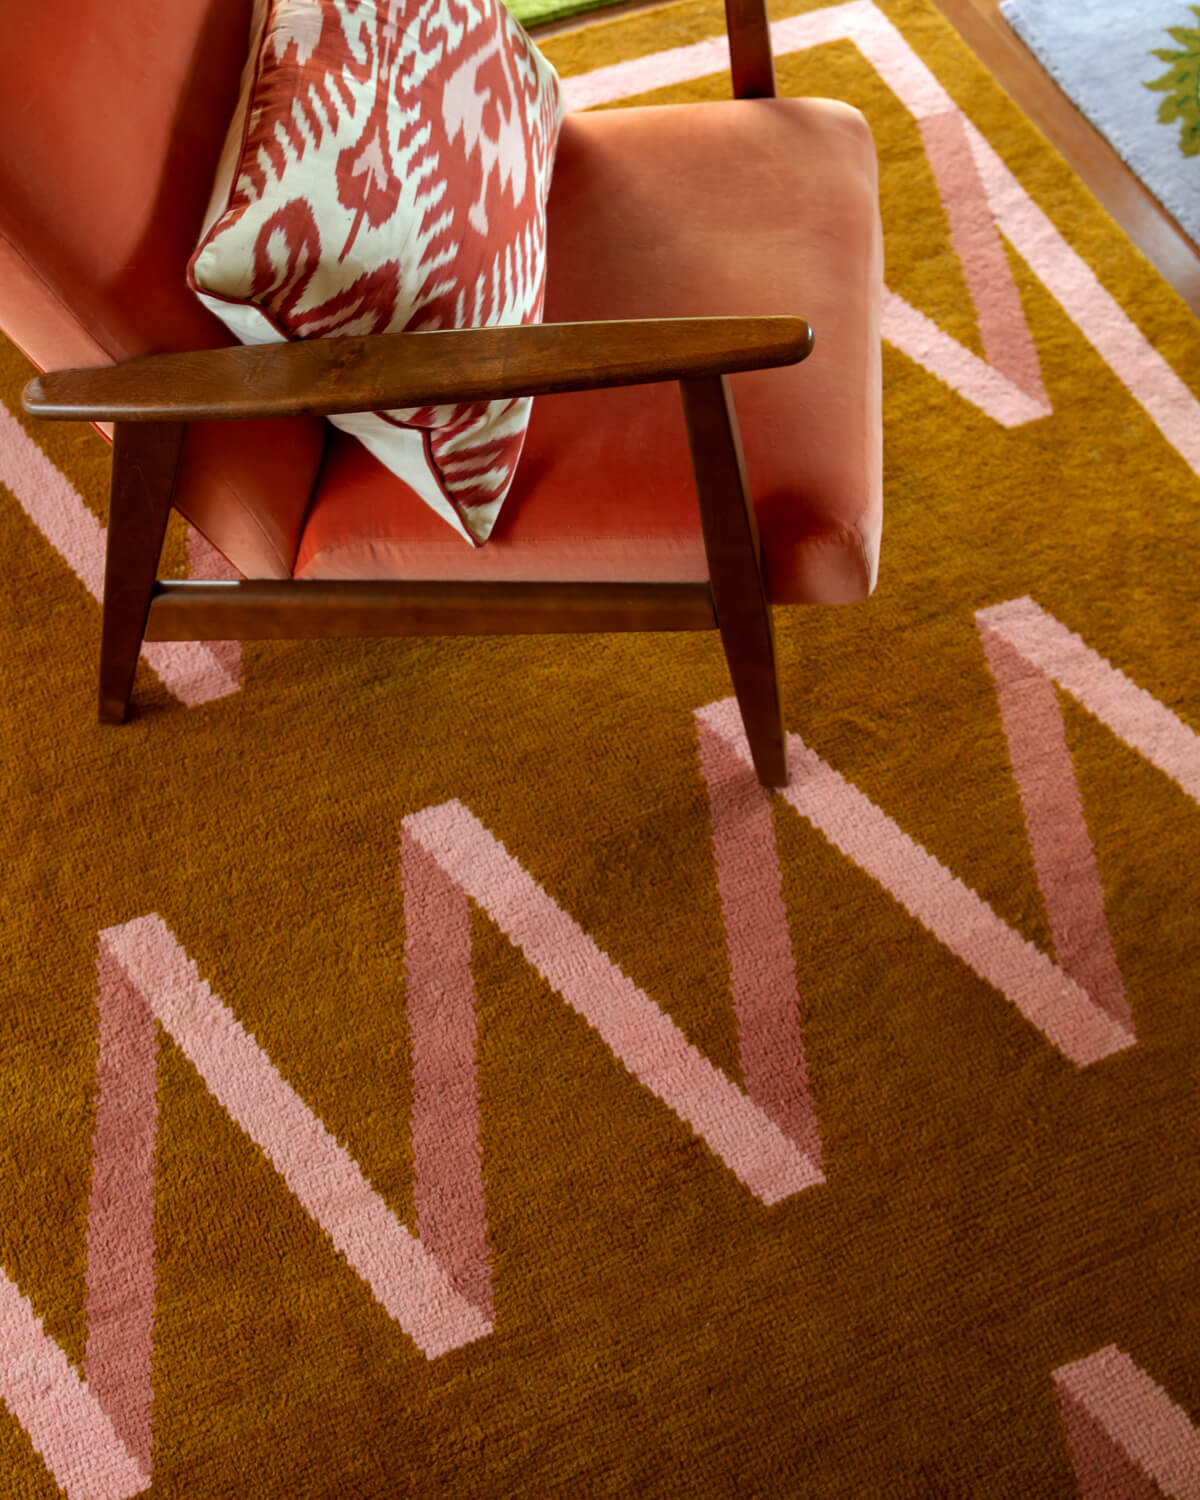 Folding-Ribbon-rug-detail-campbell-rey-nordic-knots-rug-collection-nordroom